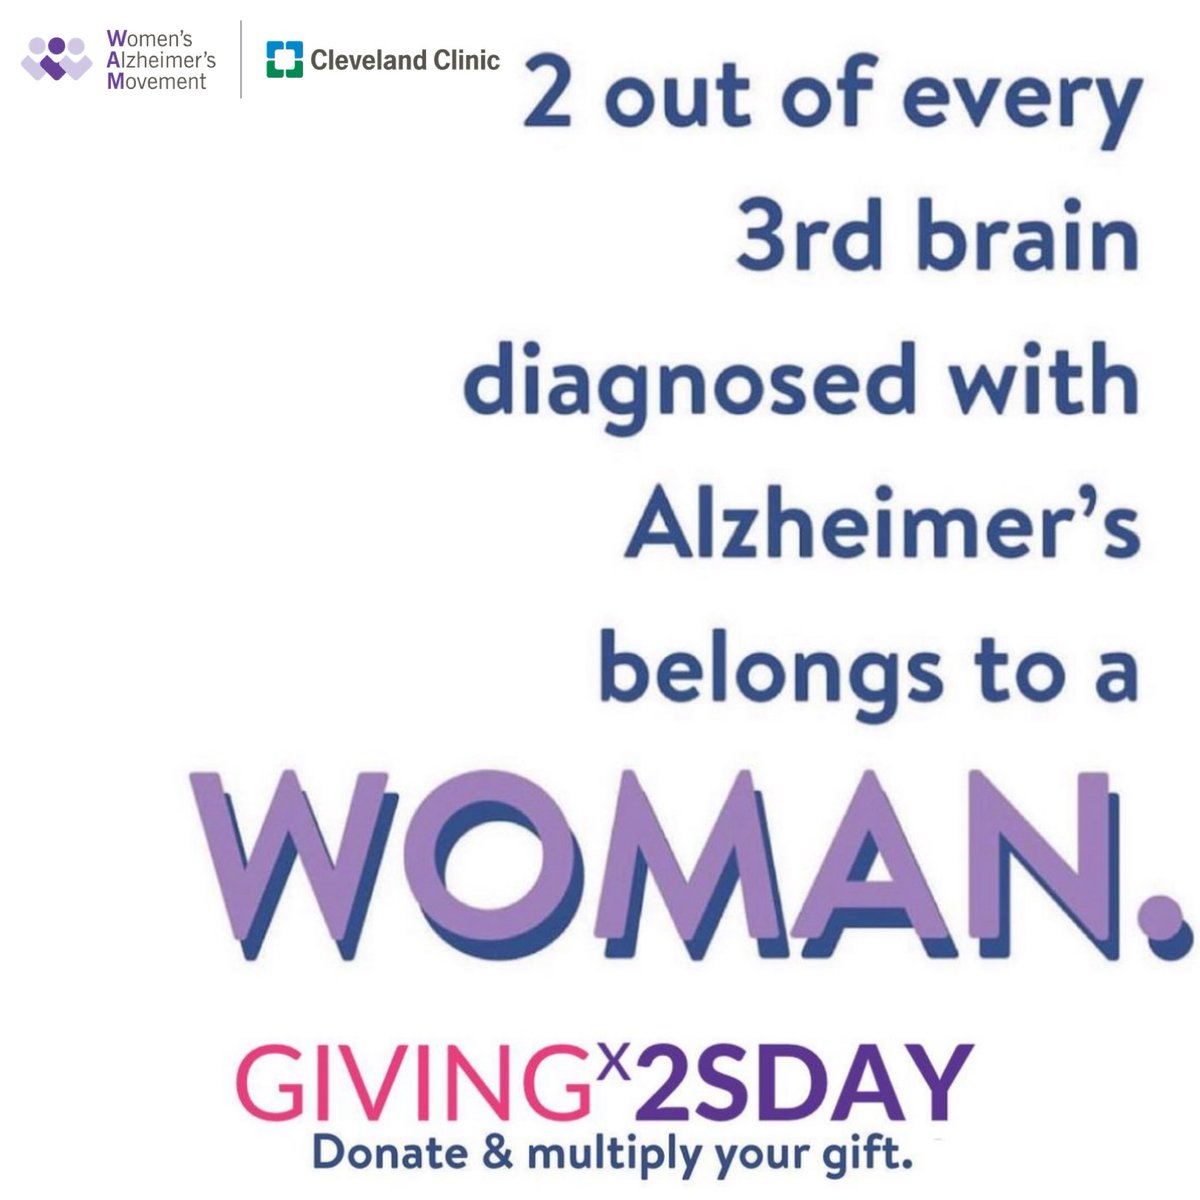 Did you know that 2 out of every 3rd brain diagnosed with Alzheimer's belongs to a woman? And we still are not totally sure why. The belief had long been that more women have Alzheimer's because they live longer. But, when I founded @womensalz, I knew there had to be more to…